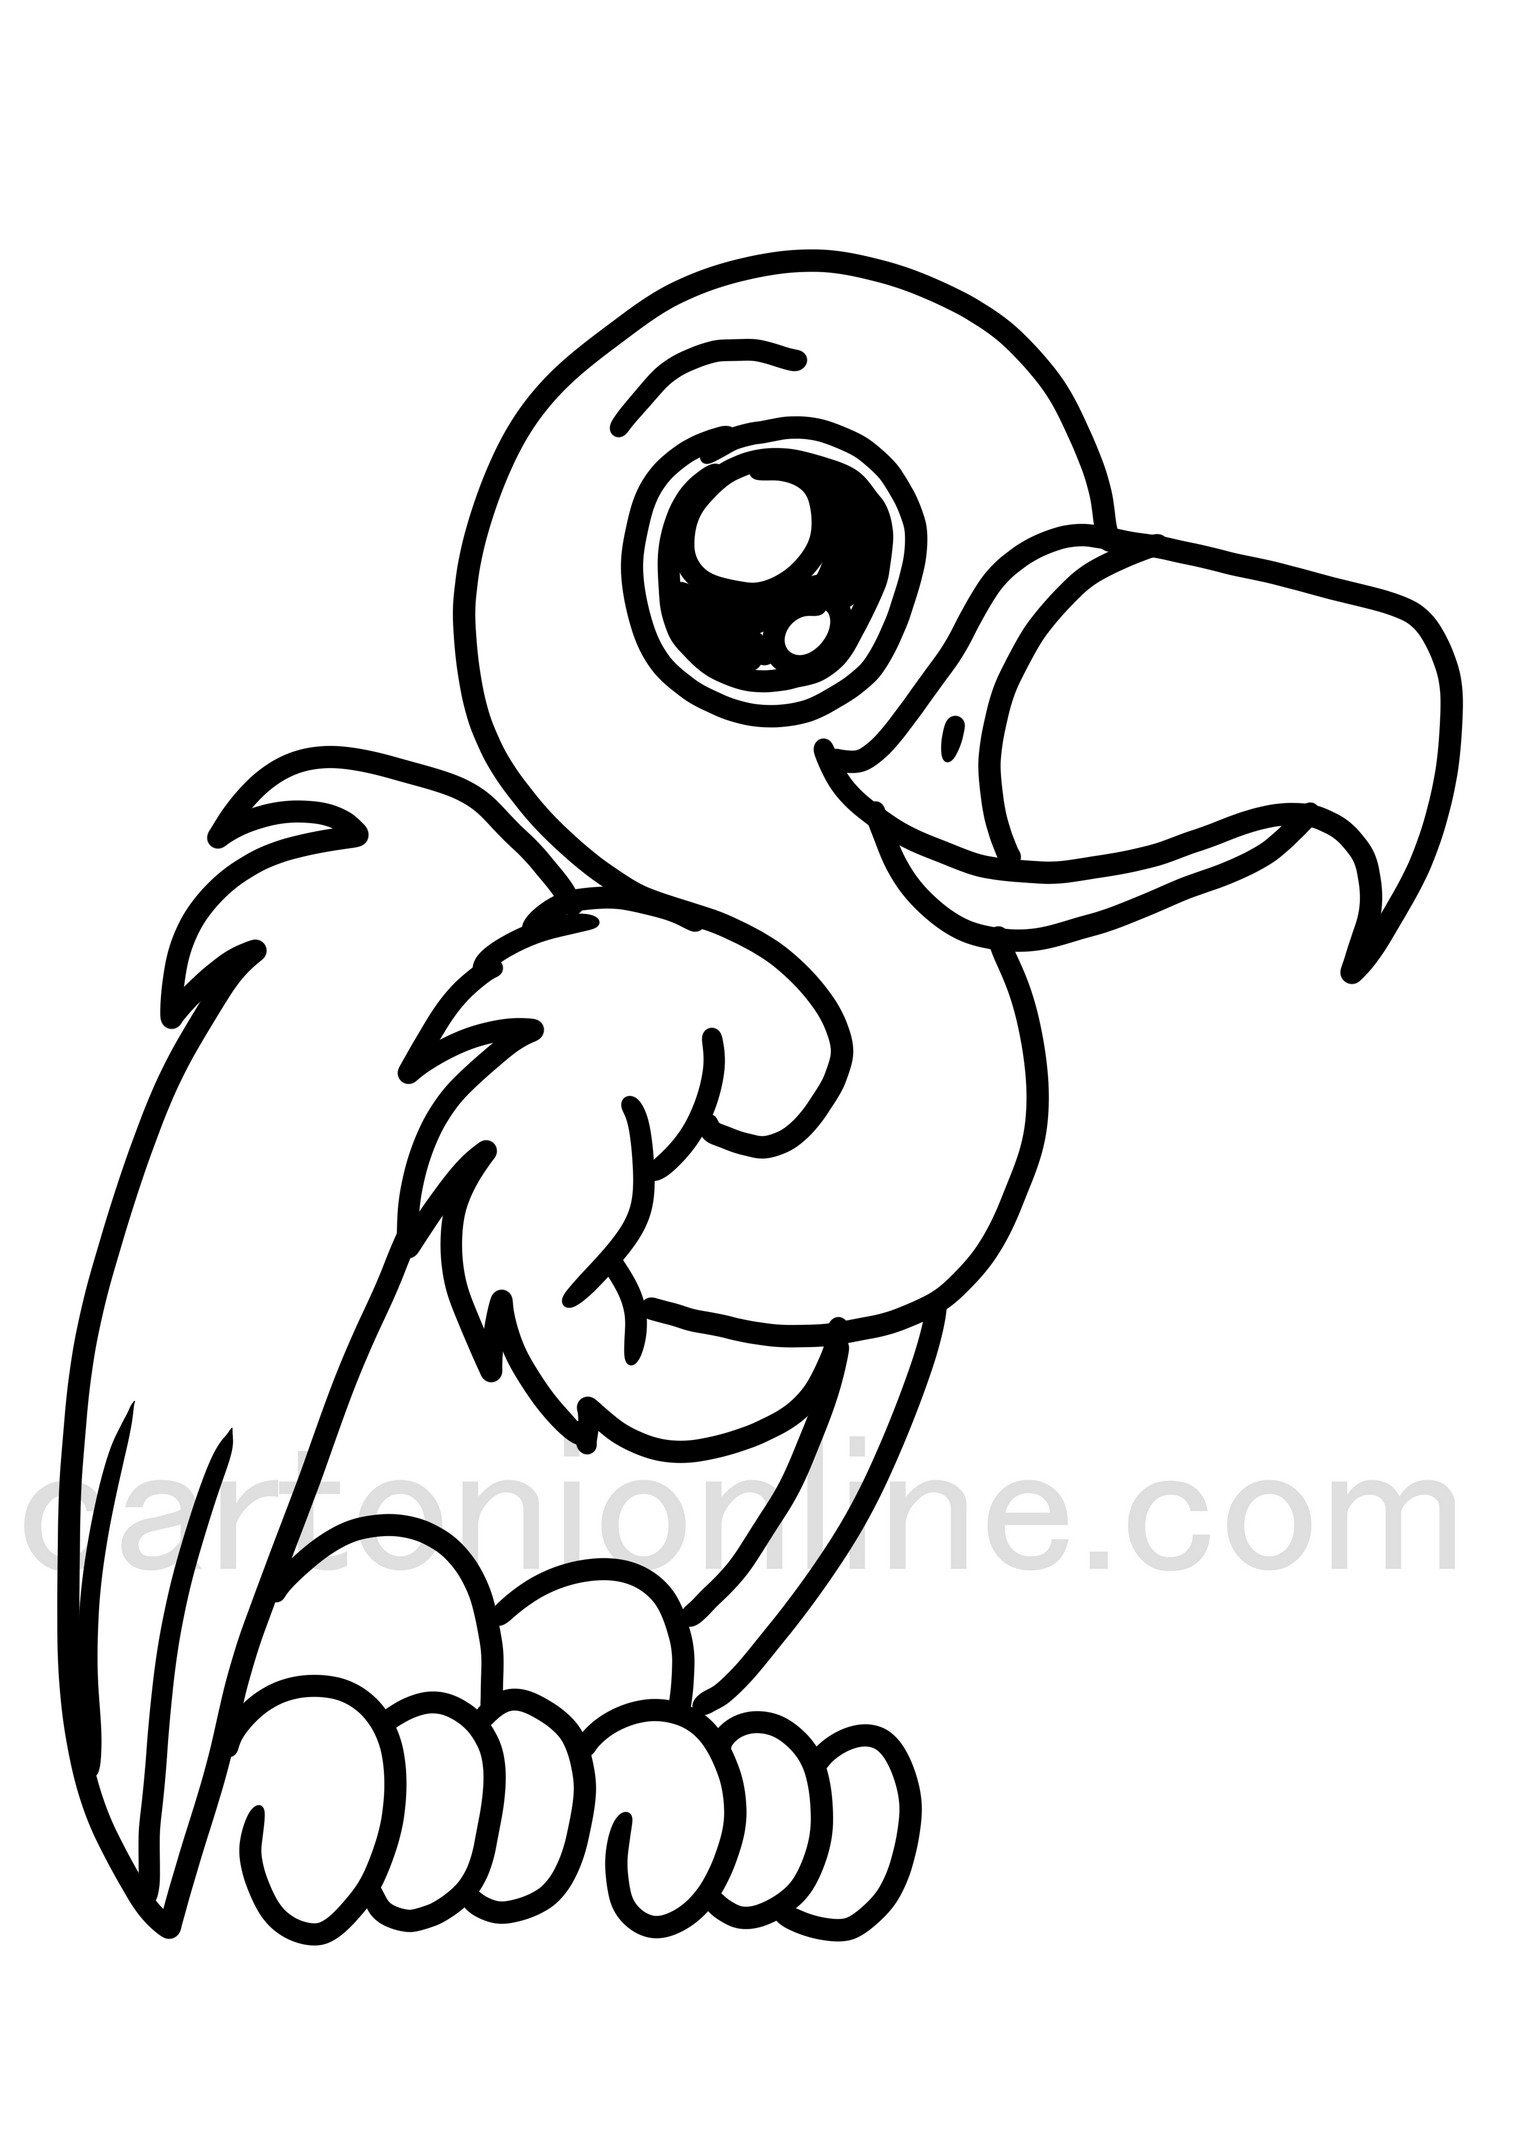 Kawaii Vulture Coloring Page For Kids - brawl stars vultures